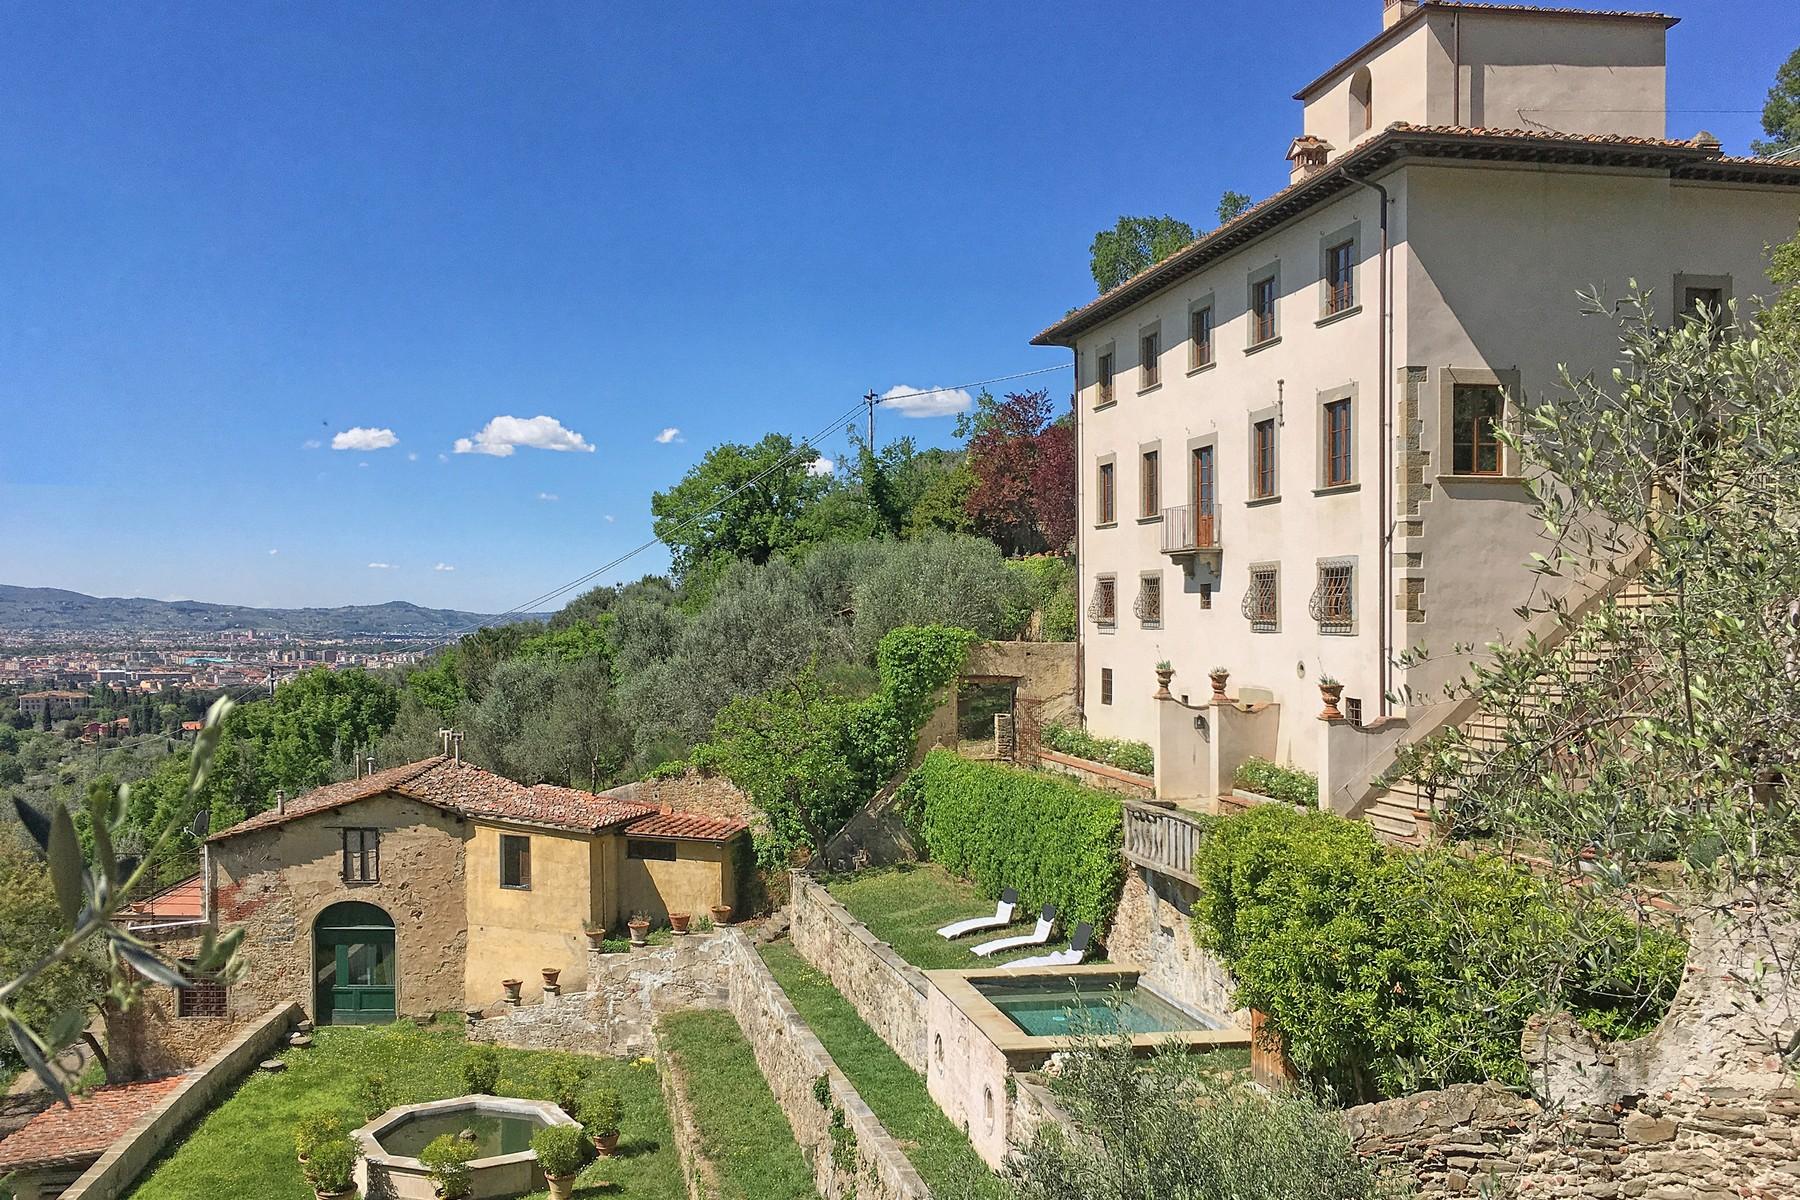 Marvellous villa with pool on the hills of Florence - 1